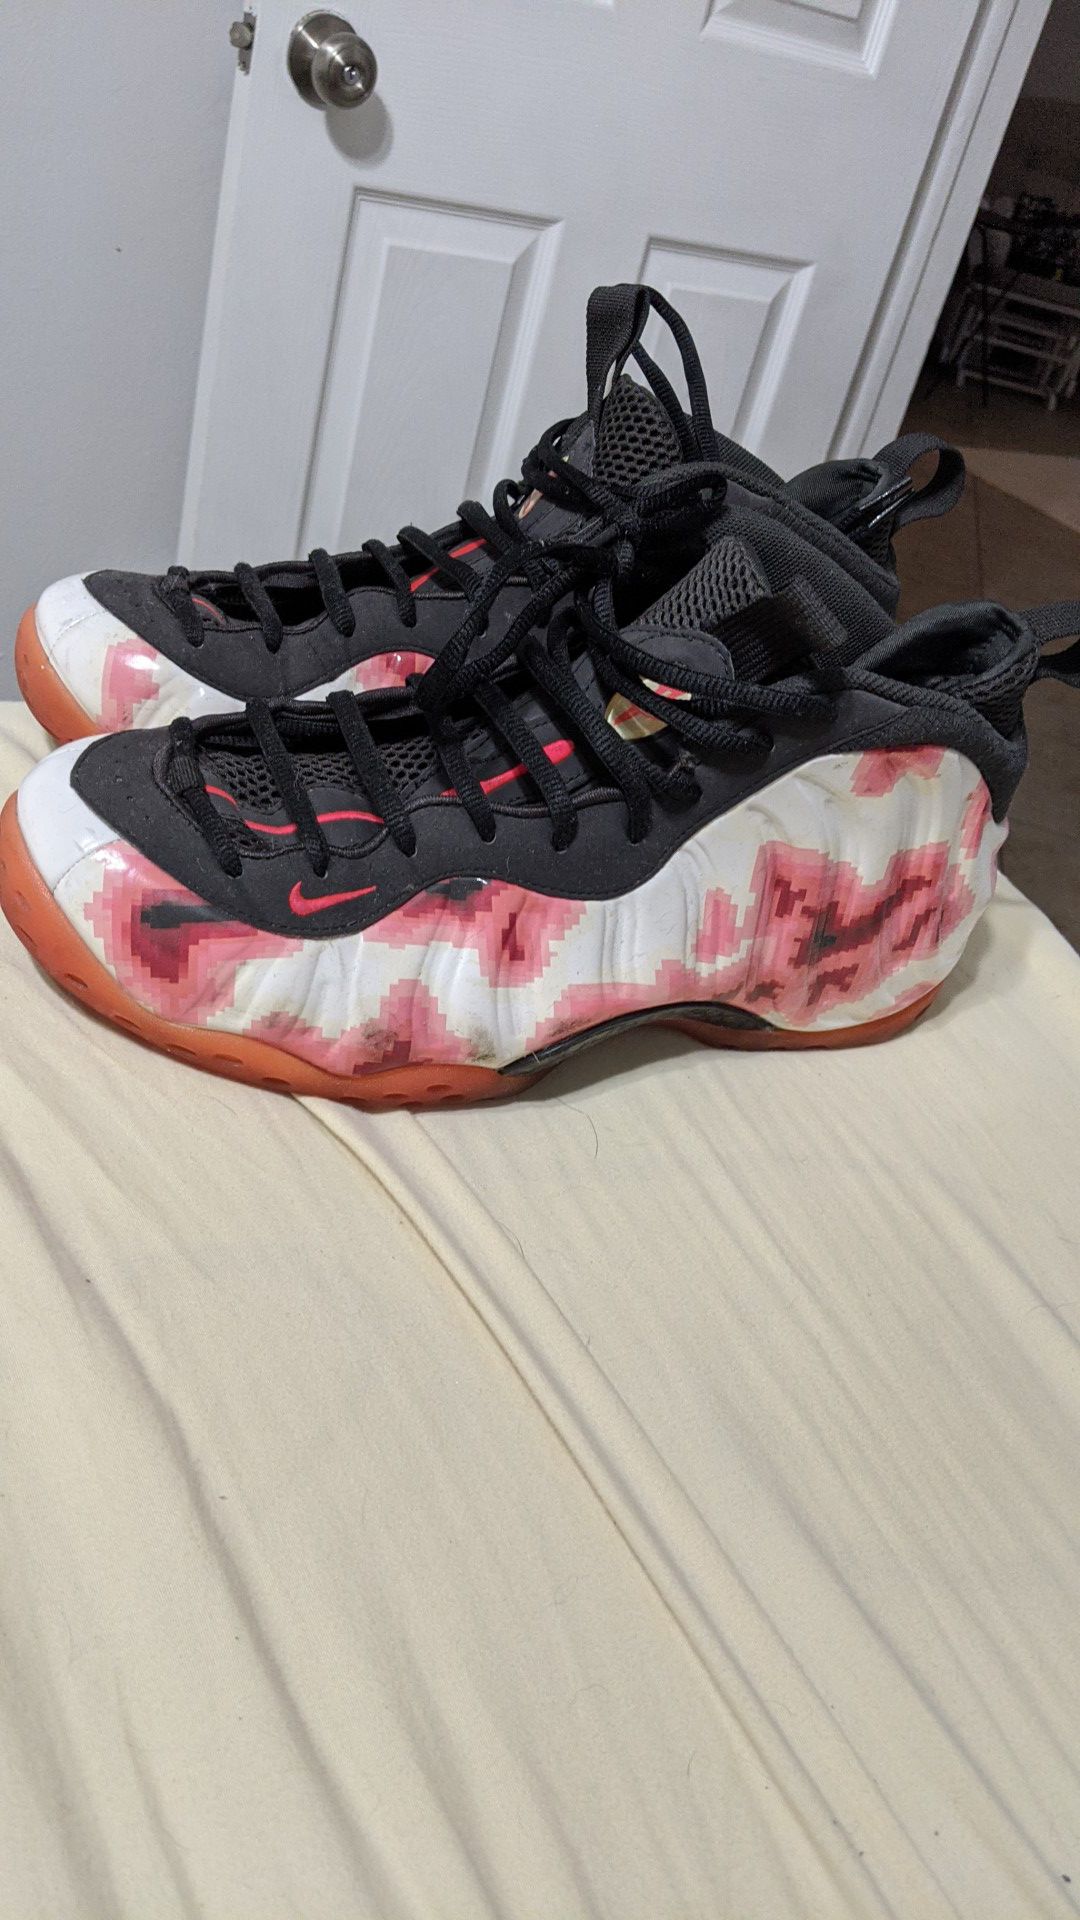 Nike Foamposite thermal map size 13